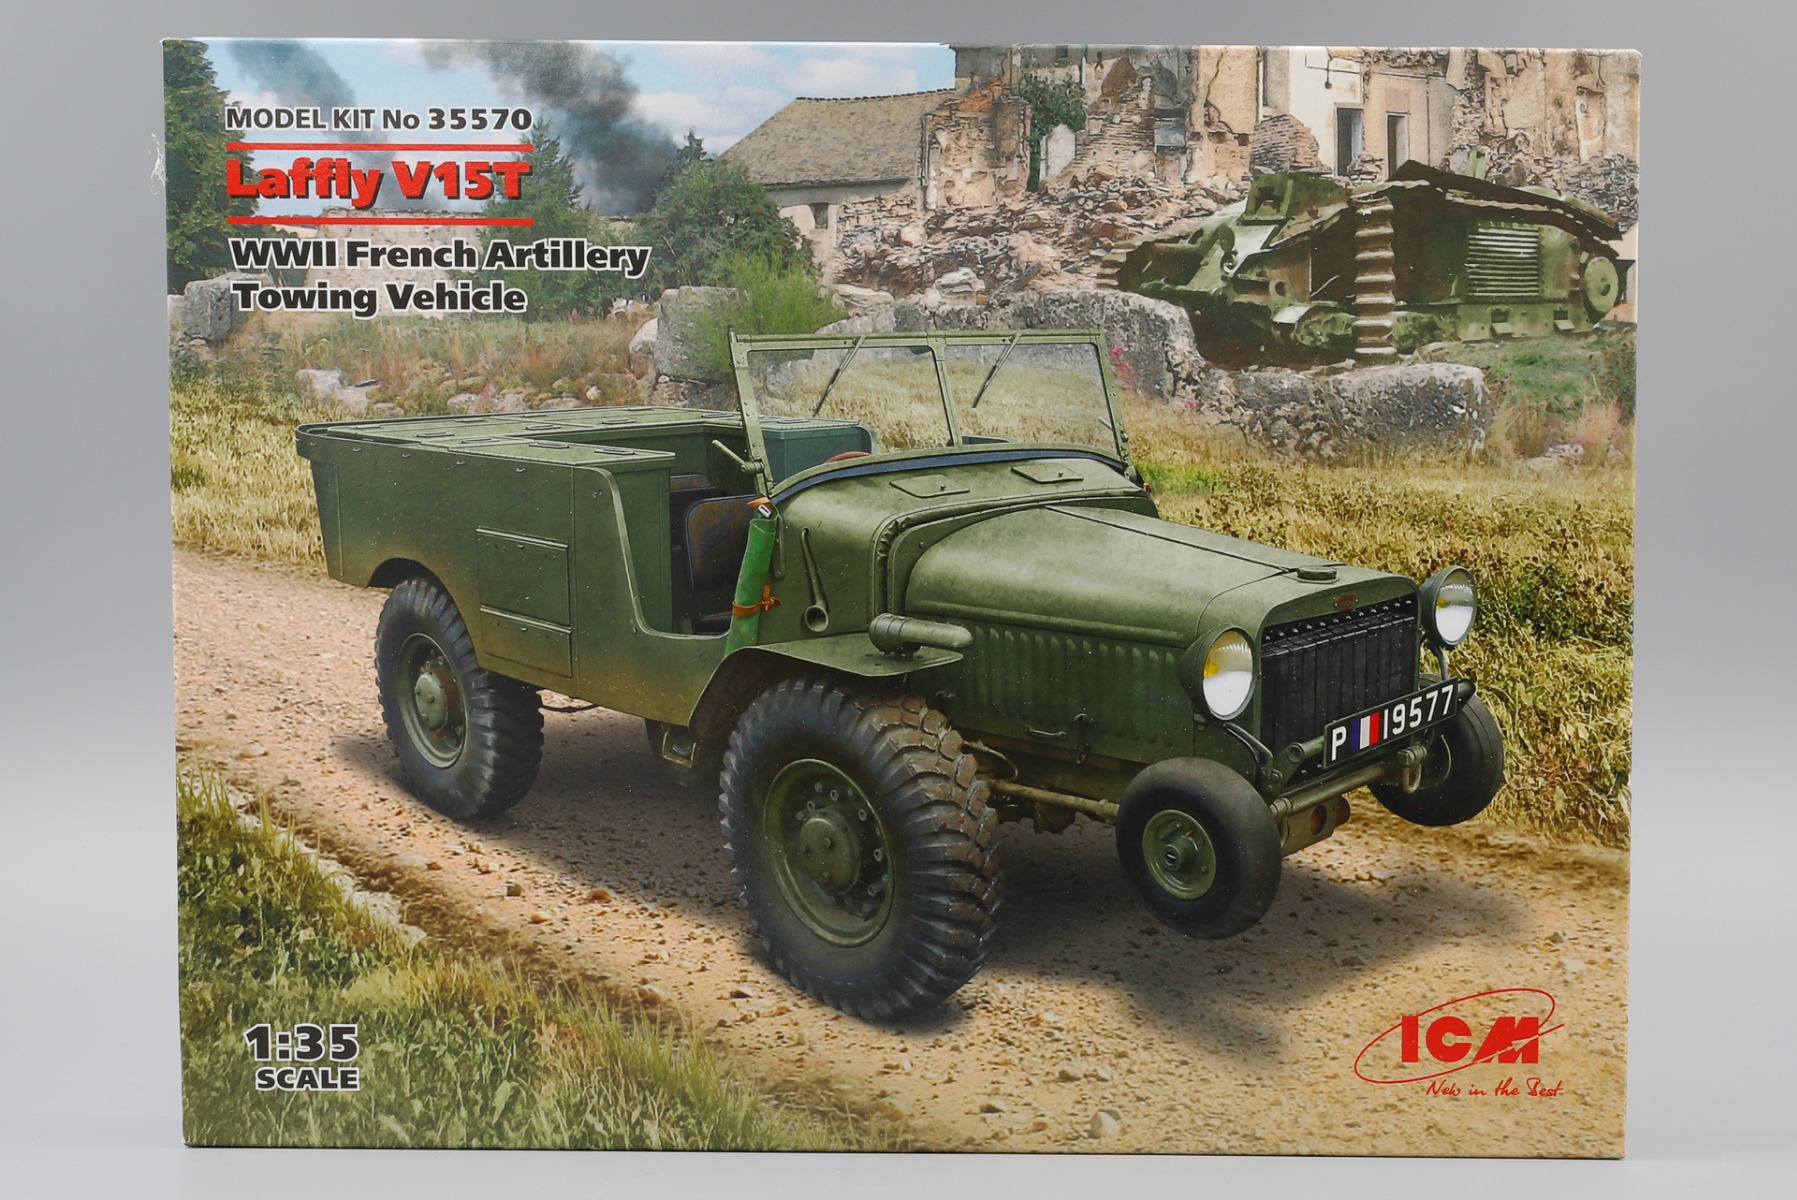  ICM35570 Laffly V15T WWII French Artillery Towing Vehicle